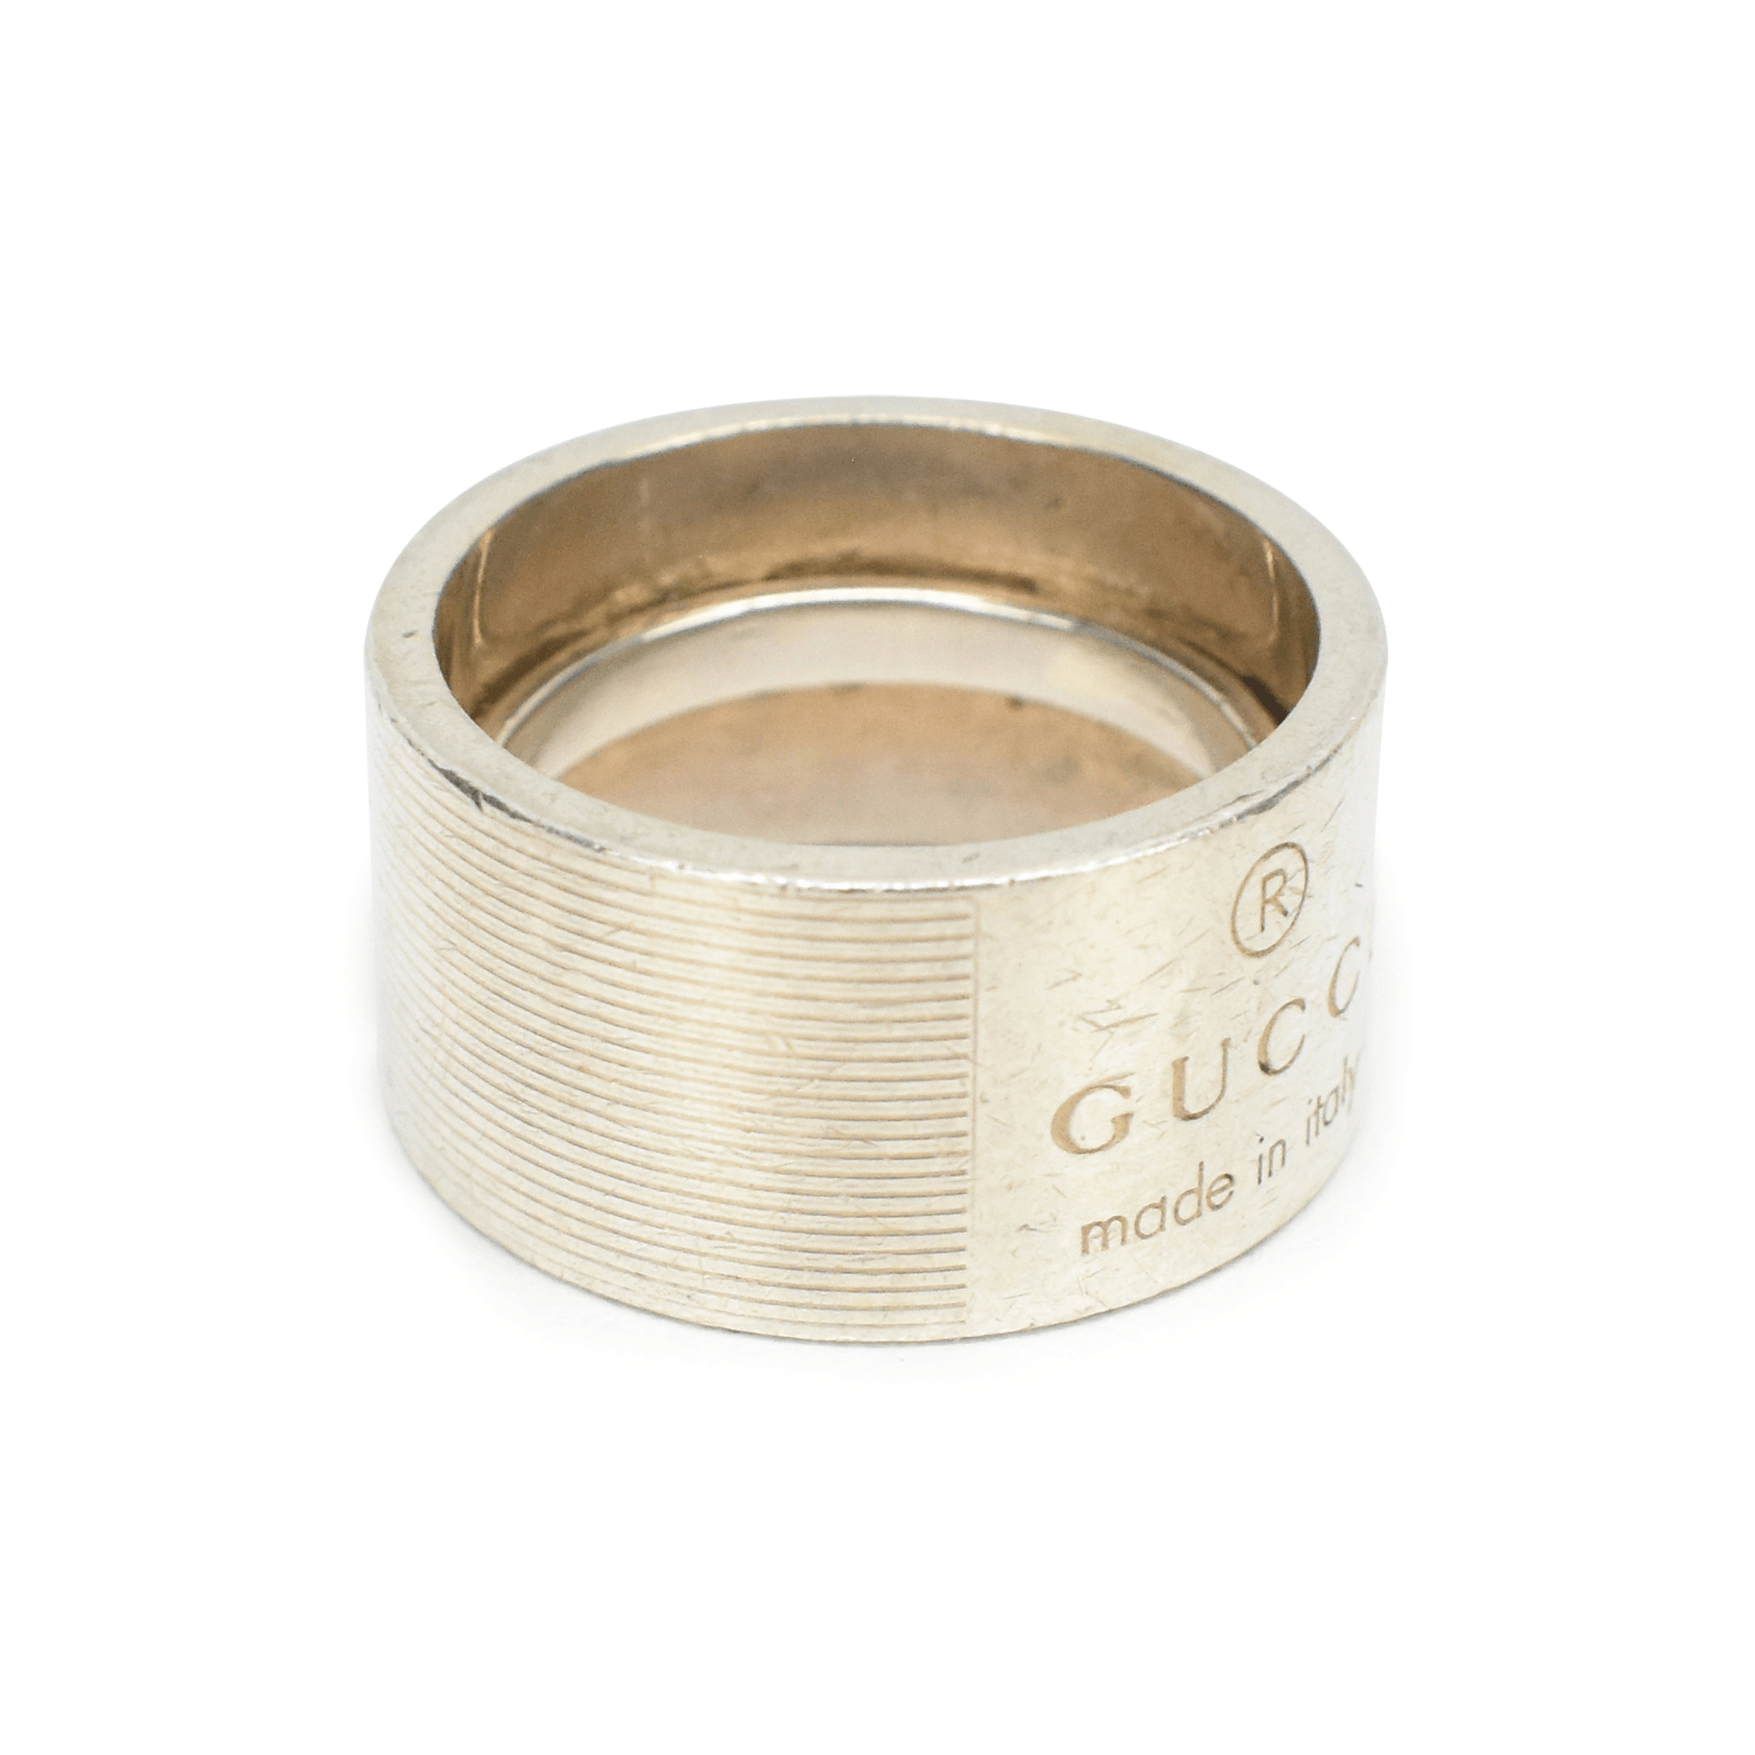 Gucci Ring - Fashionably Yours